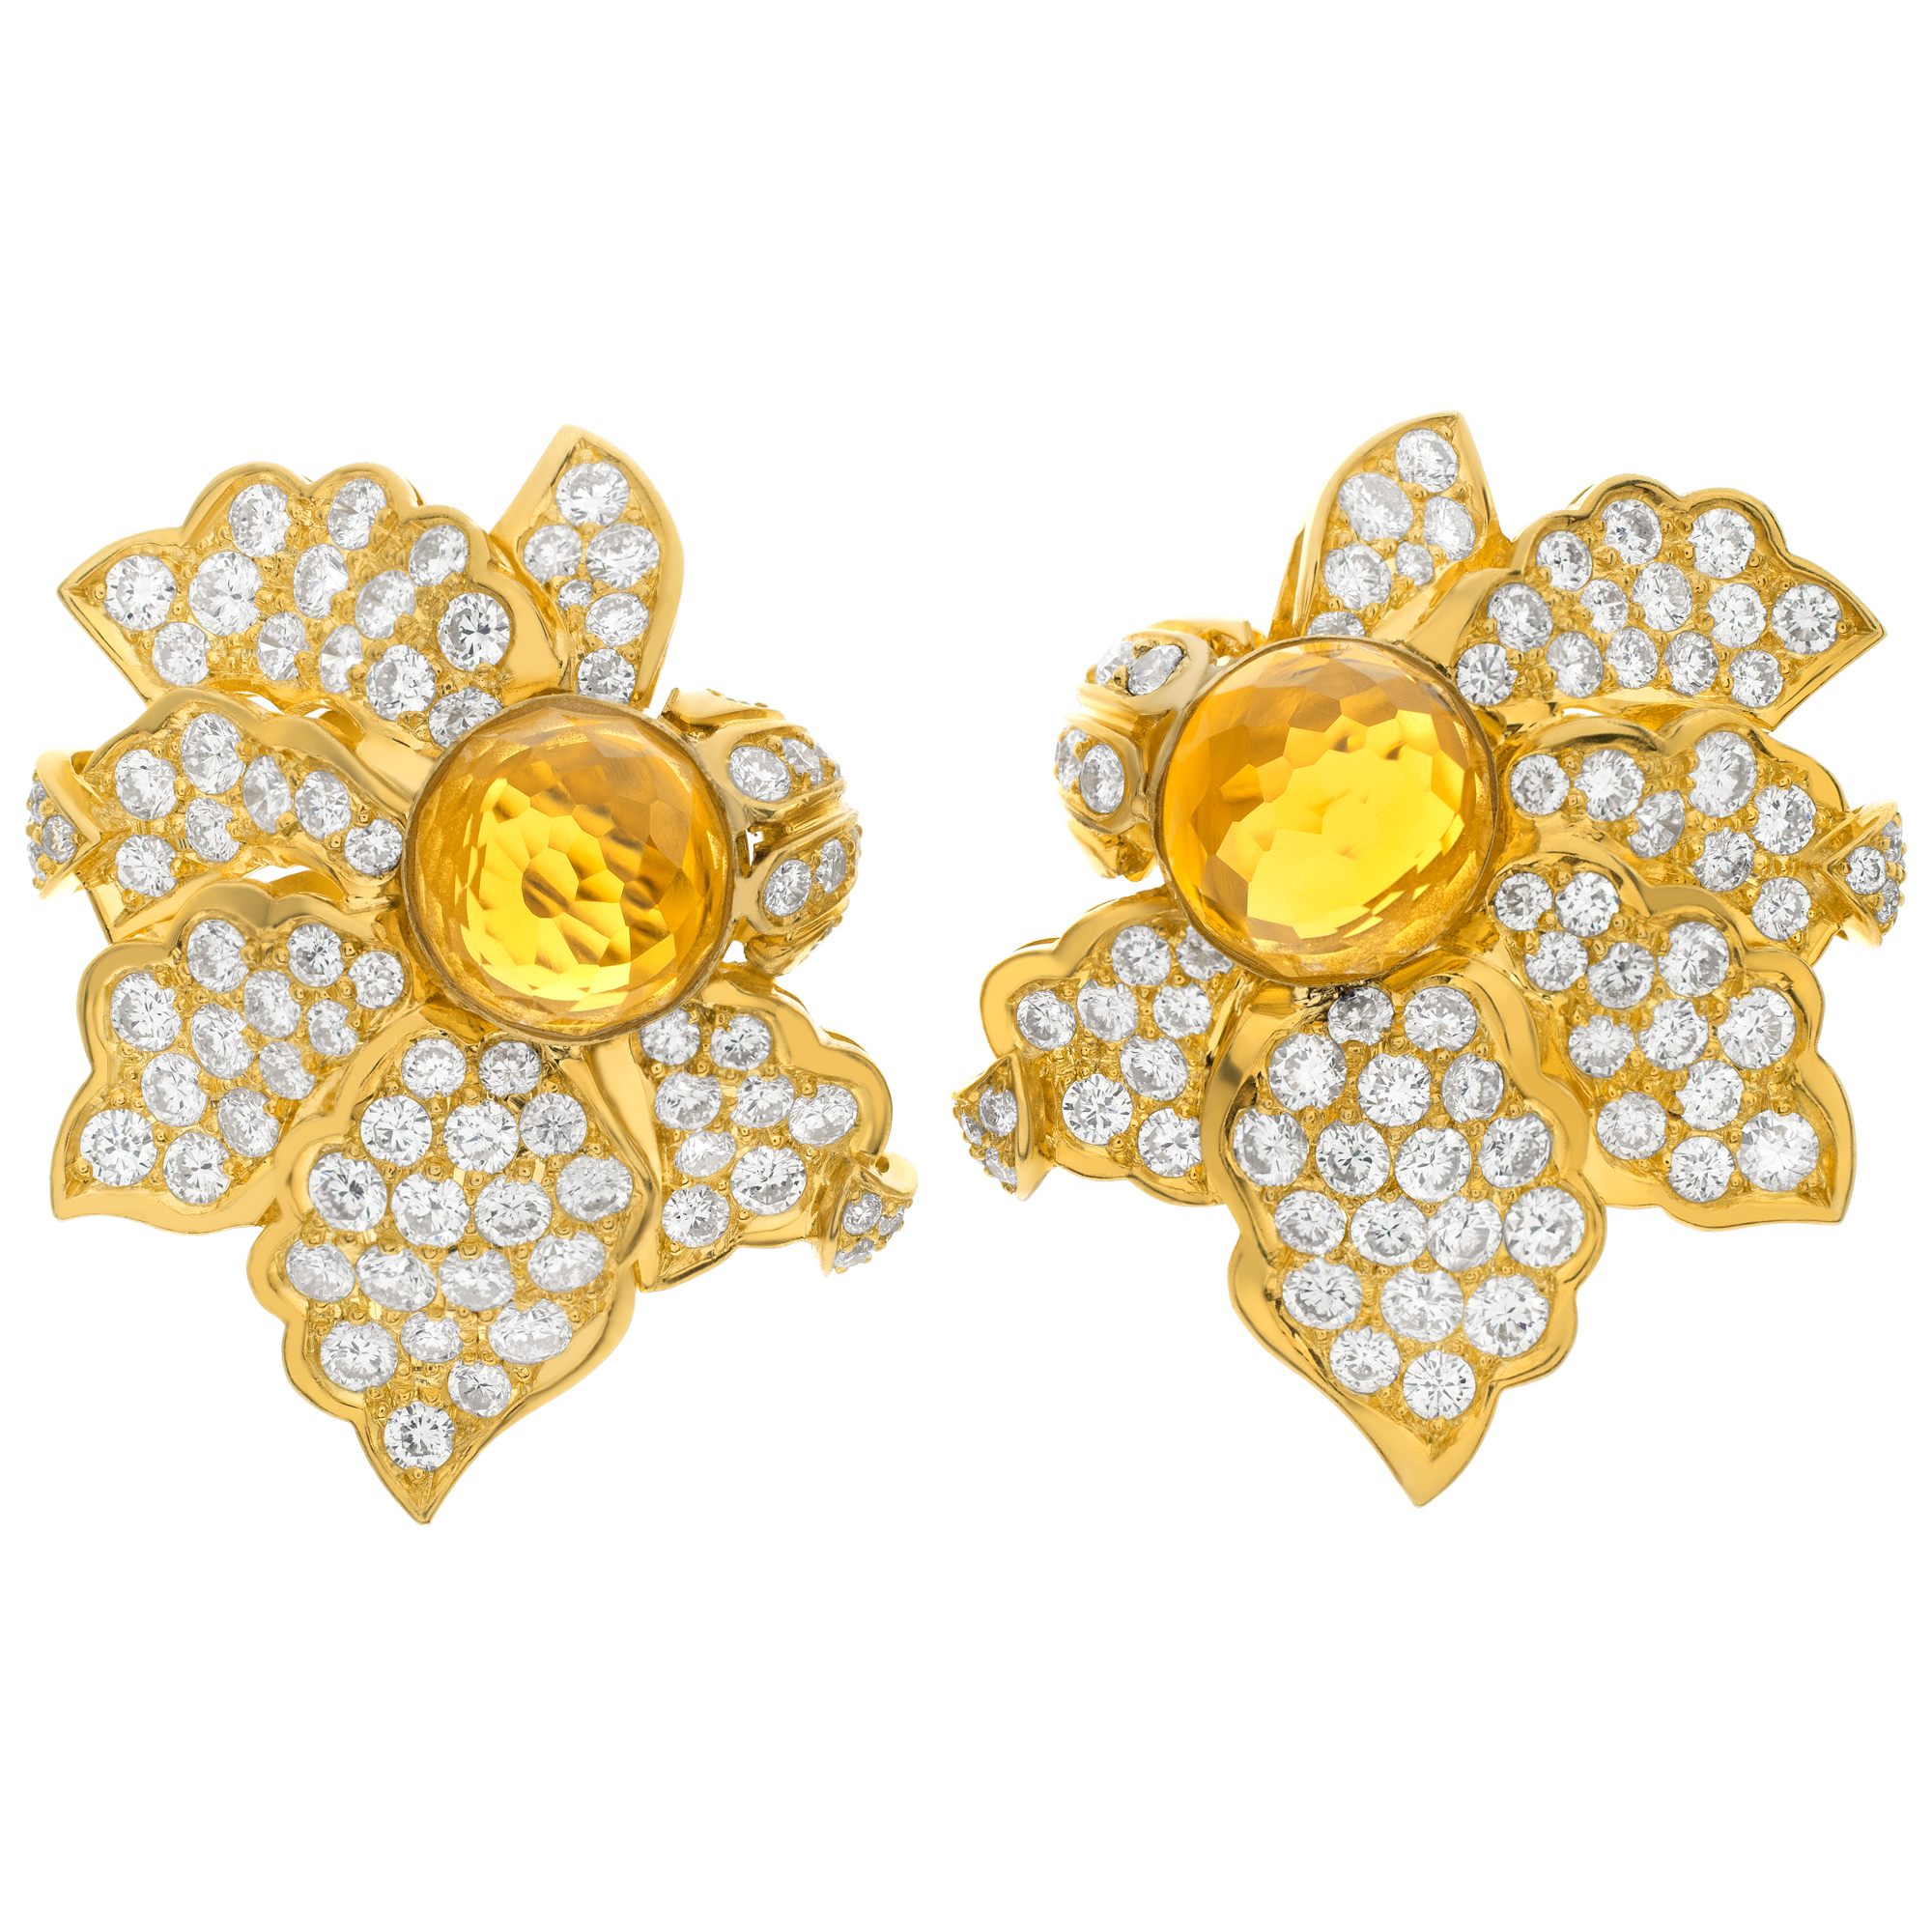 Diamonds flower earrings with brazilian orange Citrine center in 18K yellow gold. Round brilliant cut diamonds total approx. weight over 5 carats